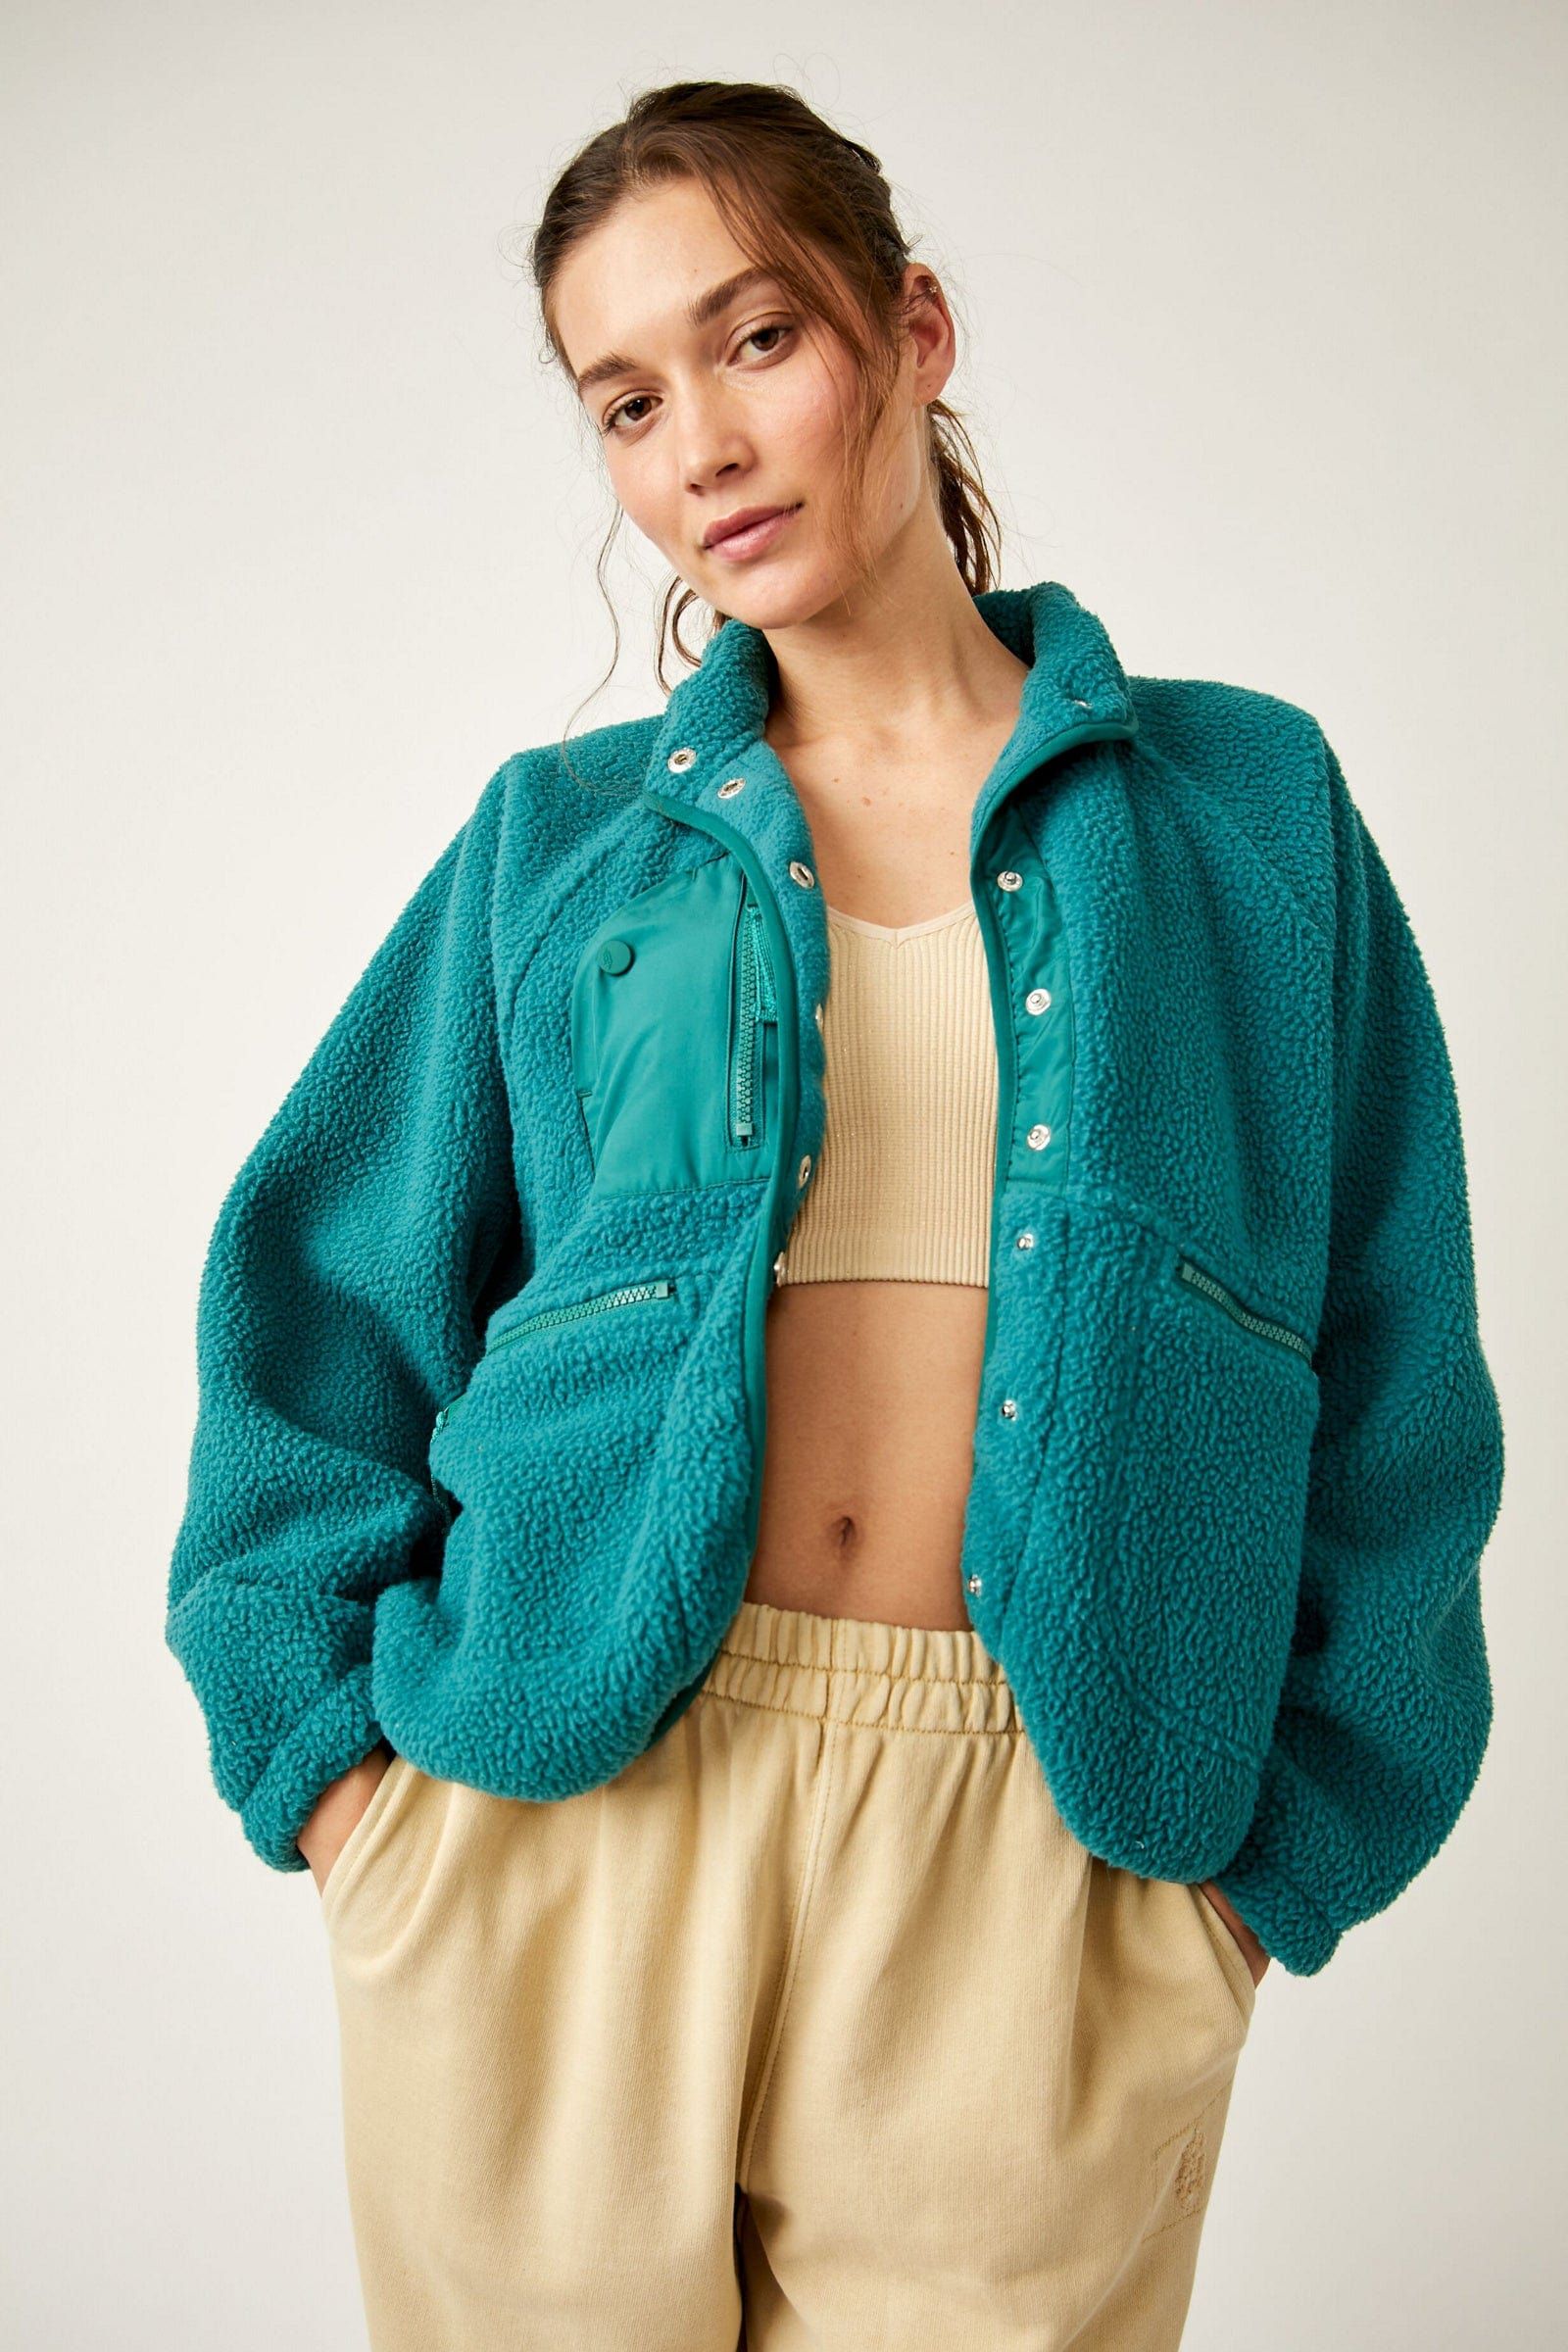 Free People Jacket Free People Hit The Slopes Jacket - Bright Forest